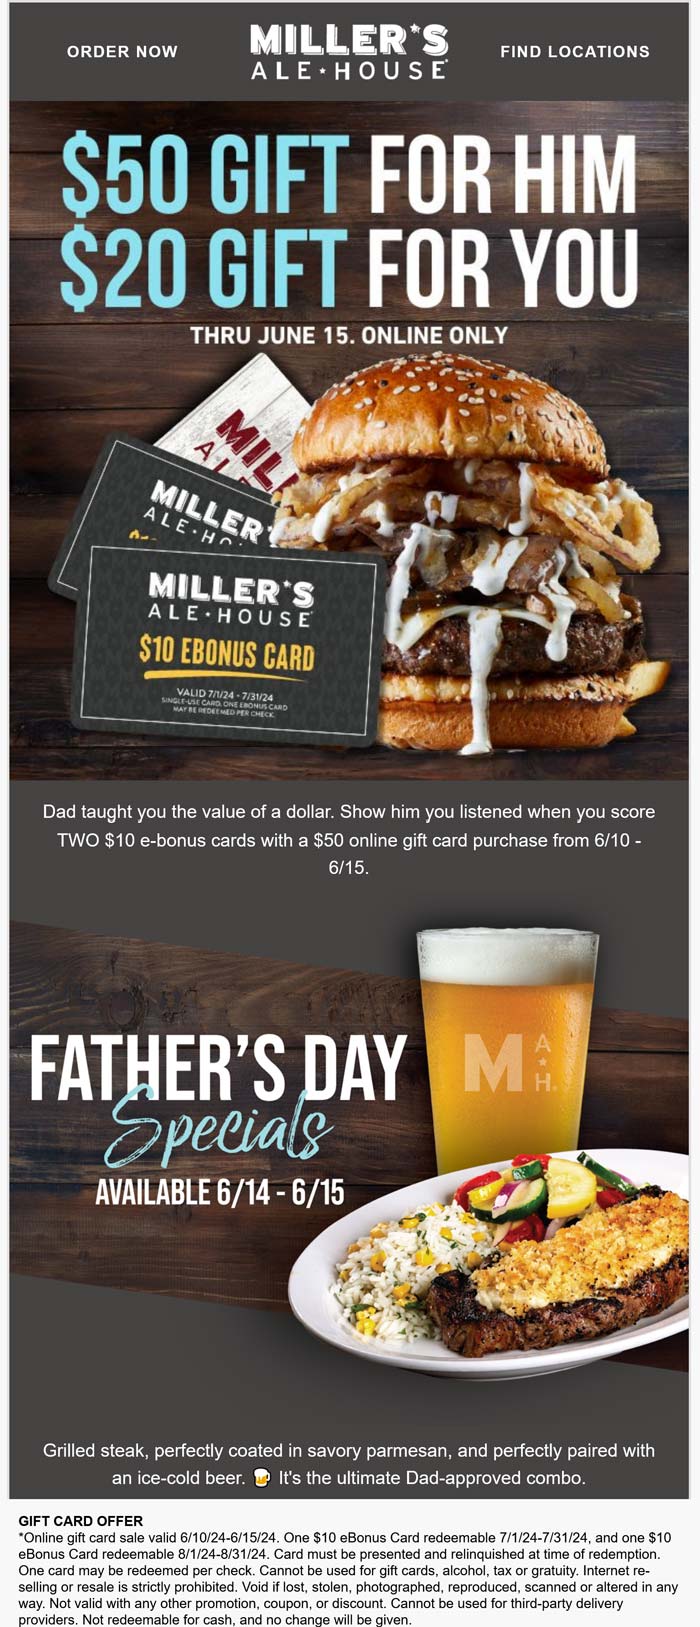 Millers Ale House restaurants Coupon  $20 card free with your $50 card at Millers Ale House restaurants #millersalehouse 